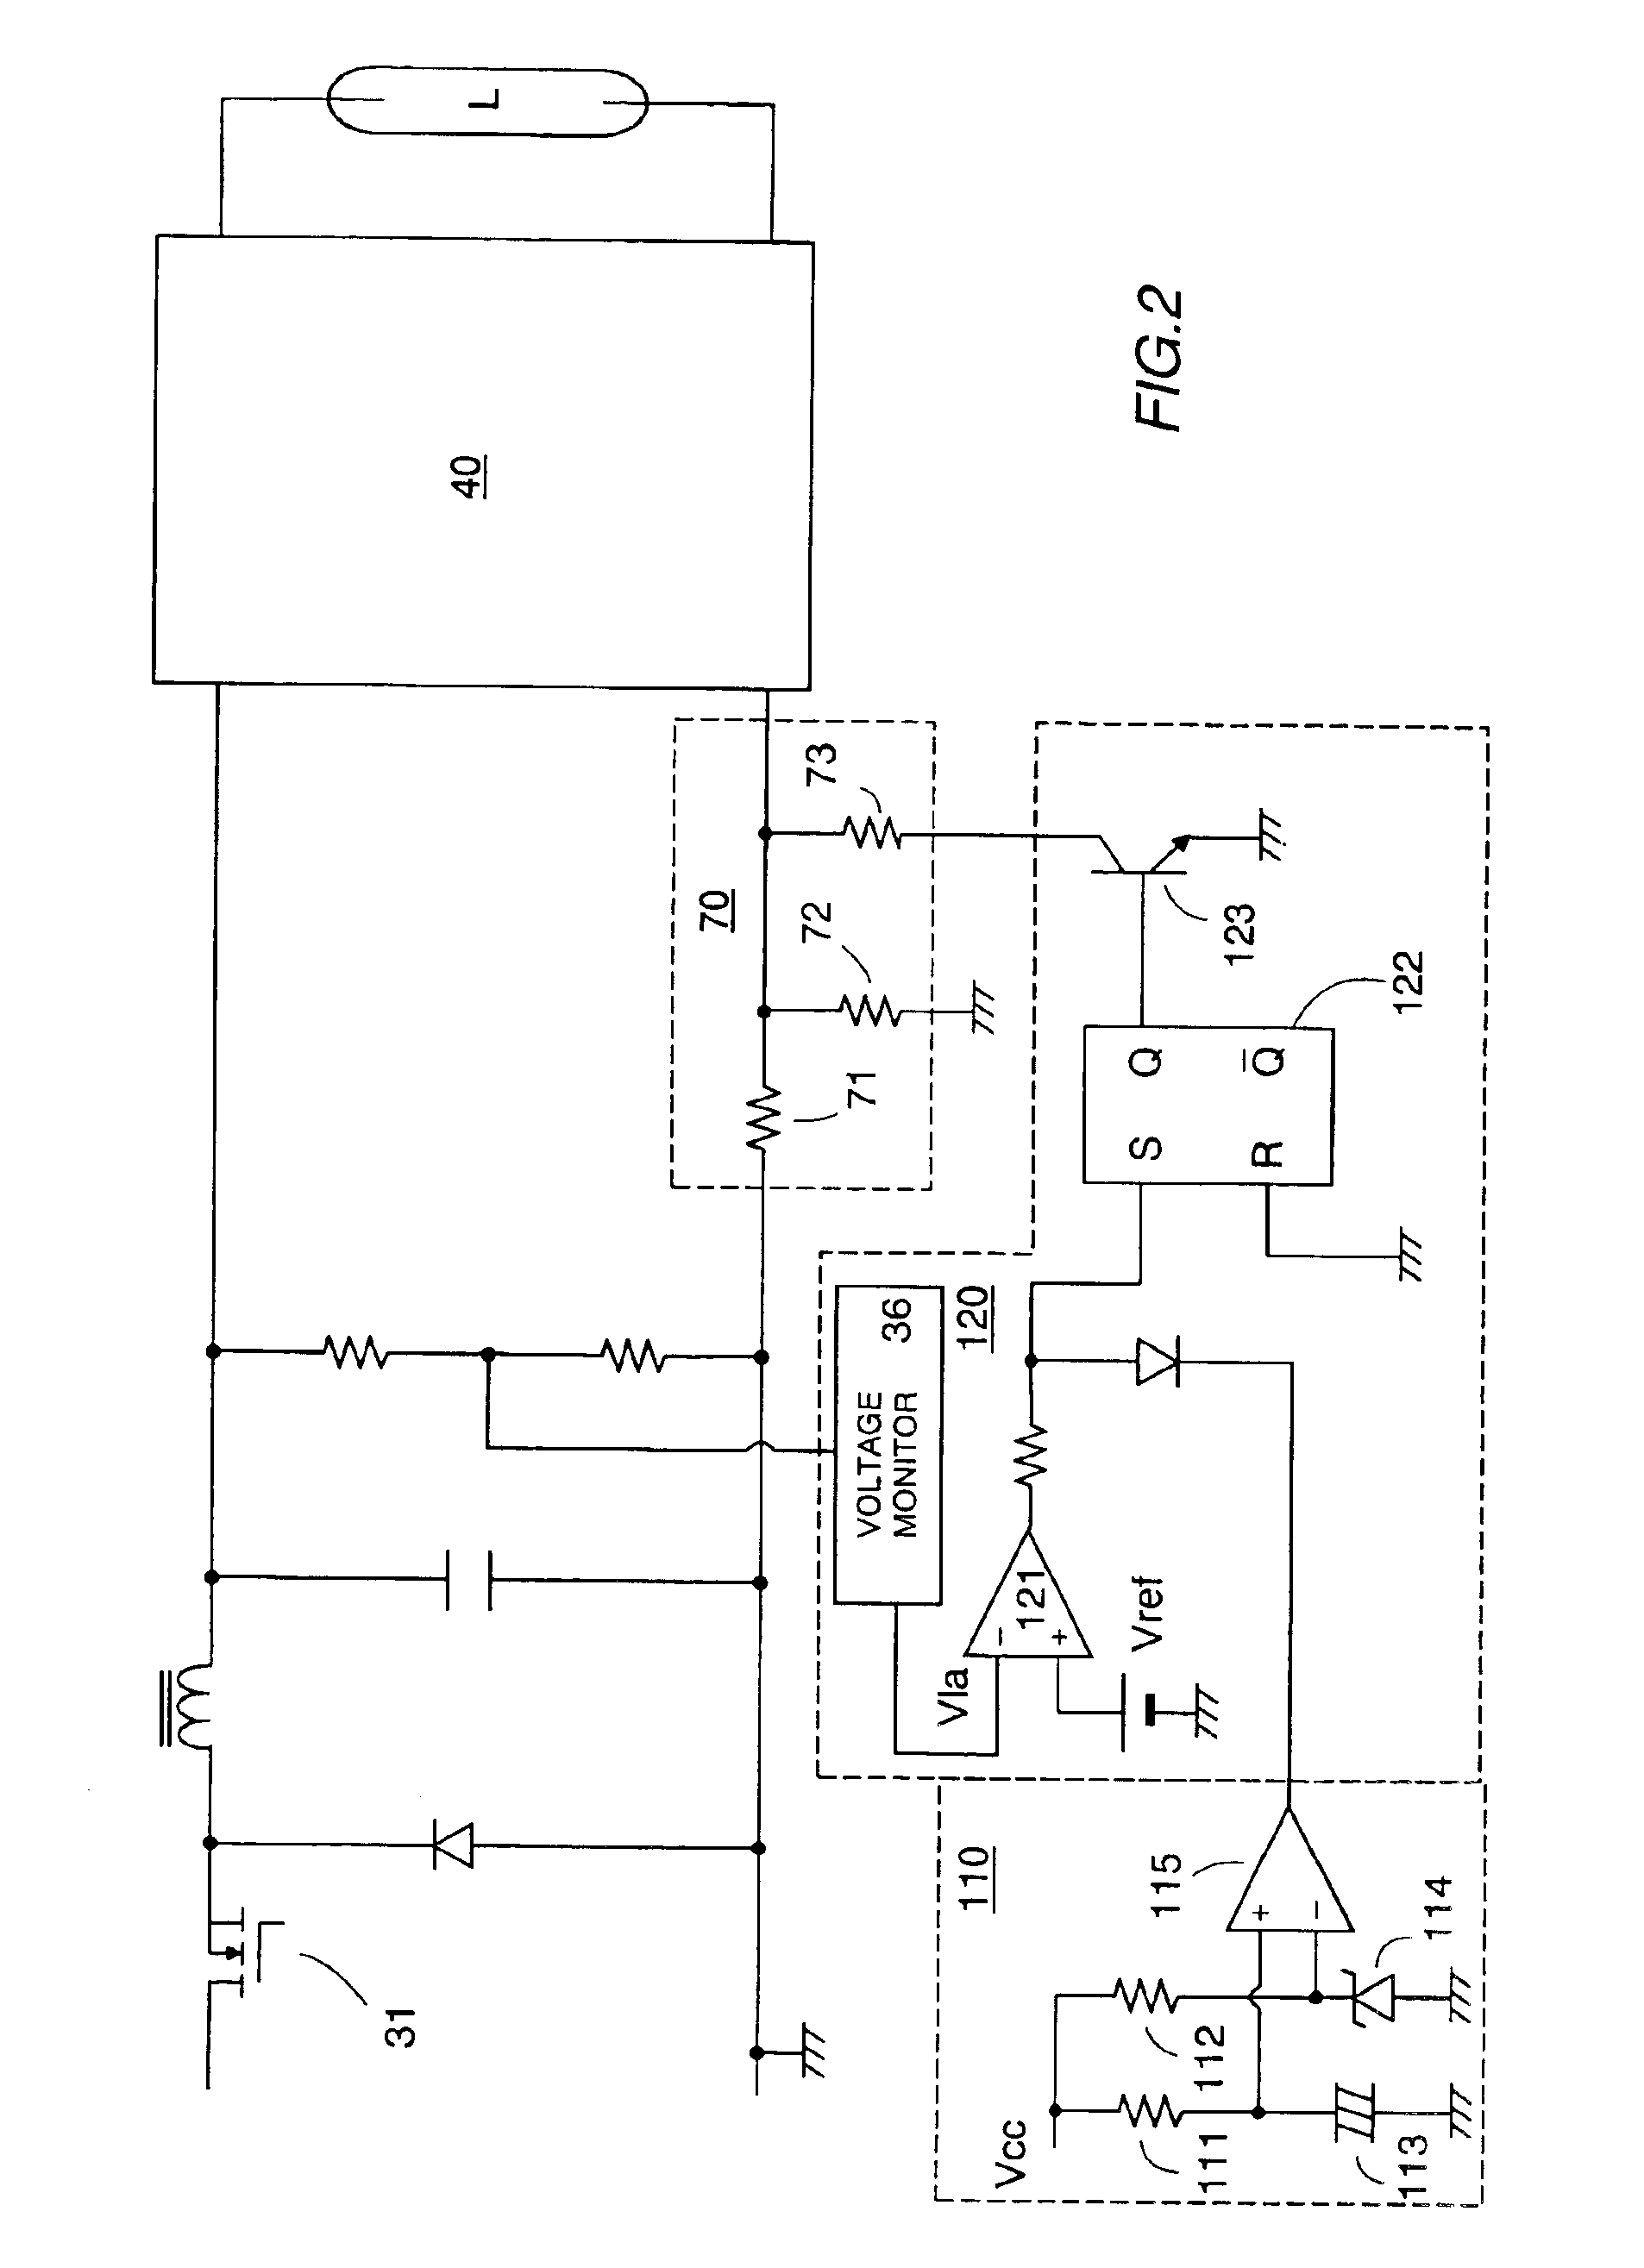 Electronic ballast for a high-pressure discharge lamp